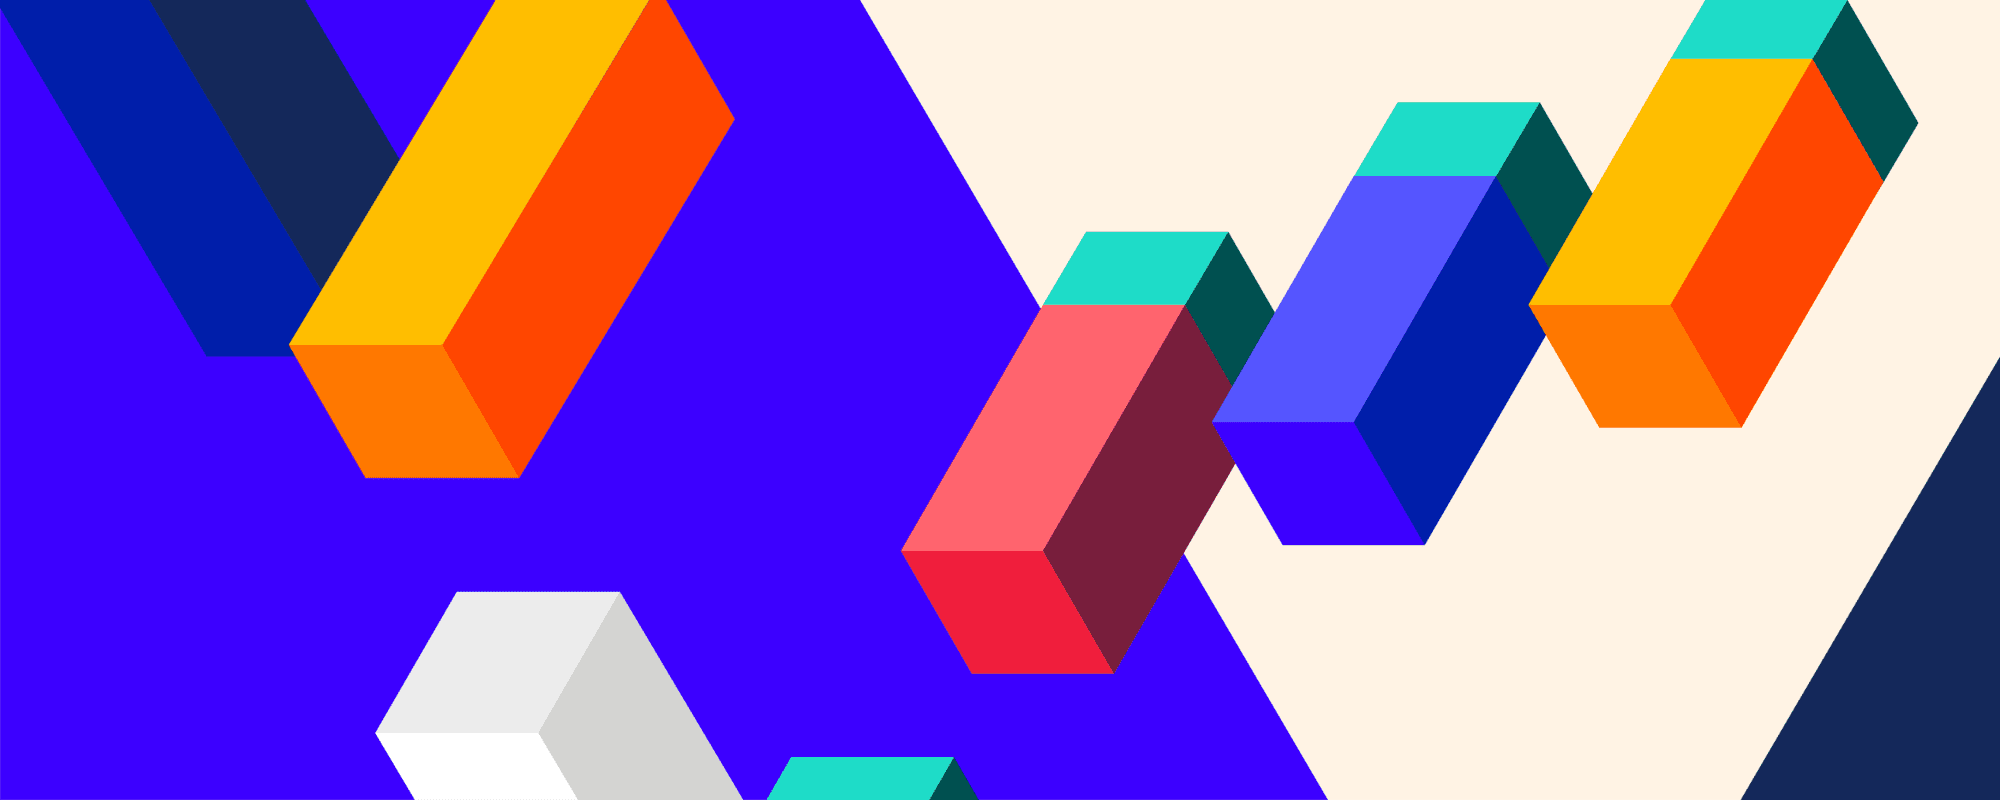 Background image showing block several shapes in different colours with a Blue and off white background.